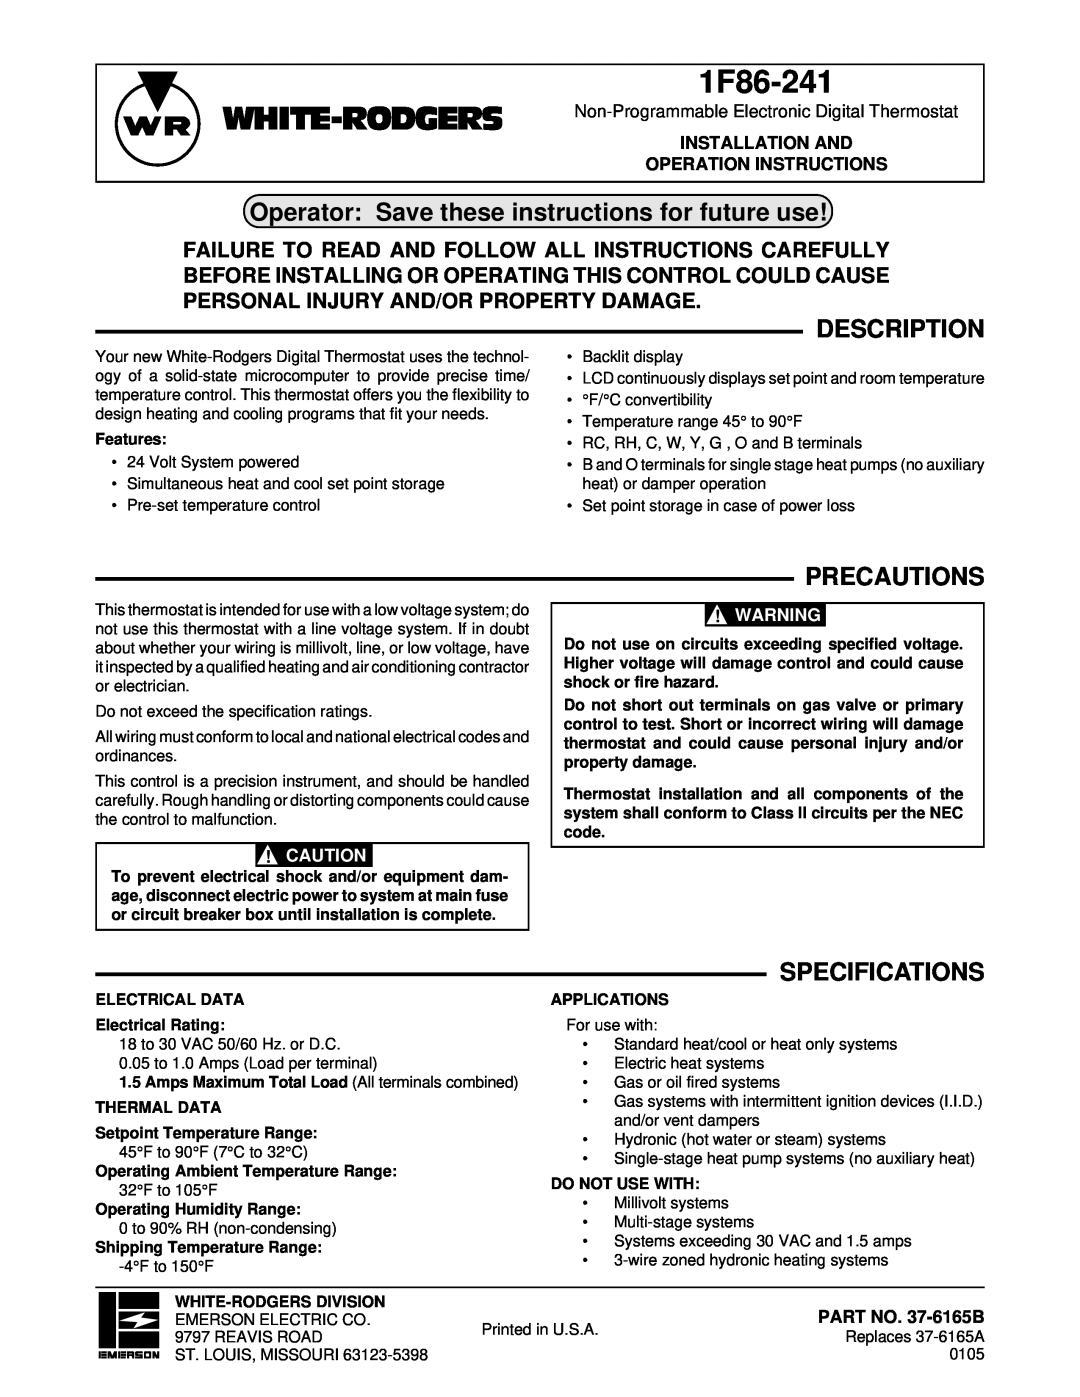 White Rodgers 1F86-241 specifications Operator Save these instructions for future use, Description, Precautions 